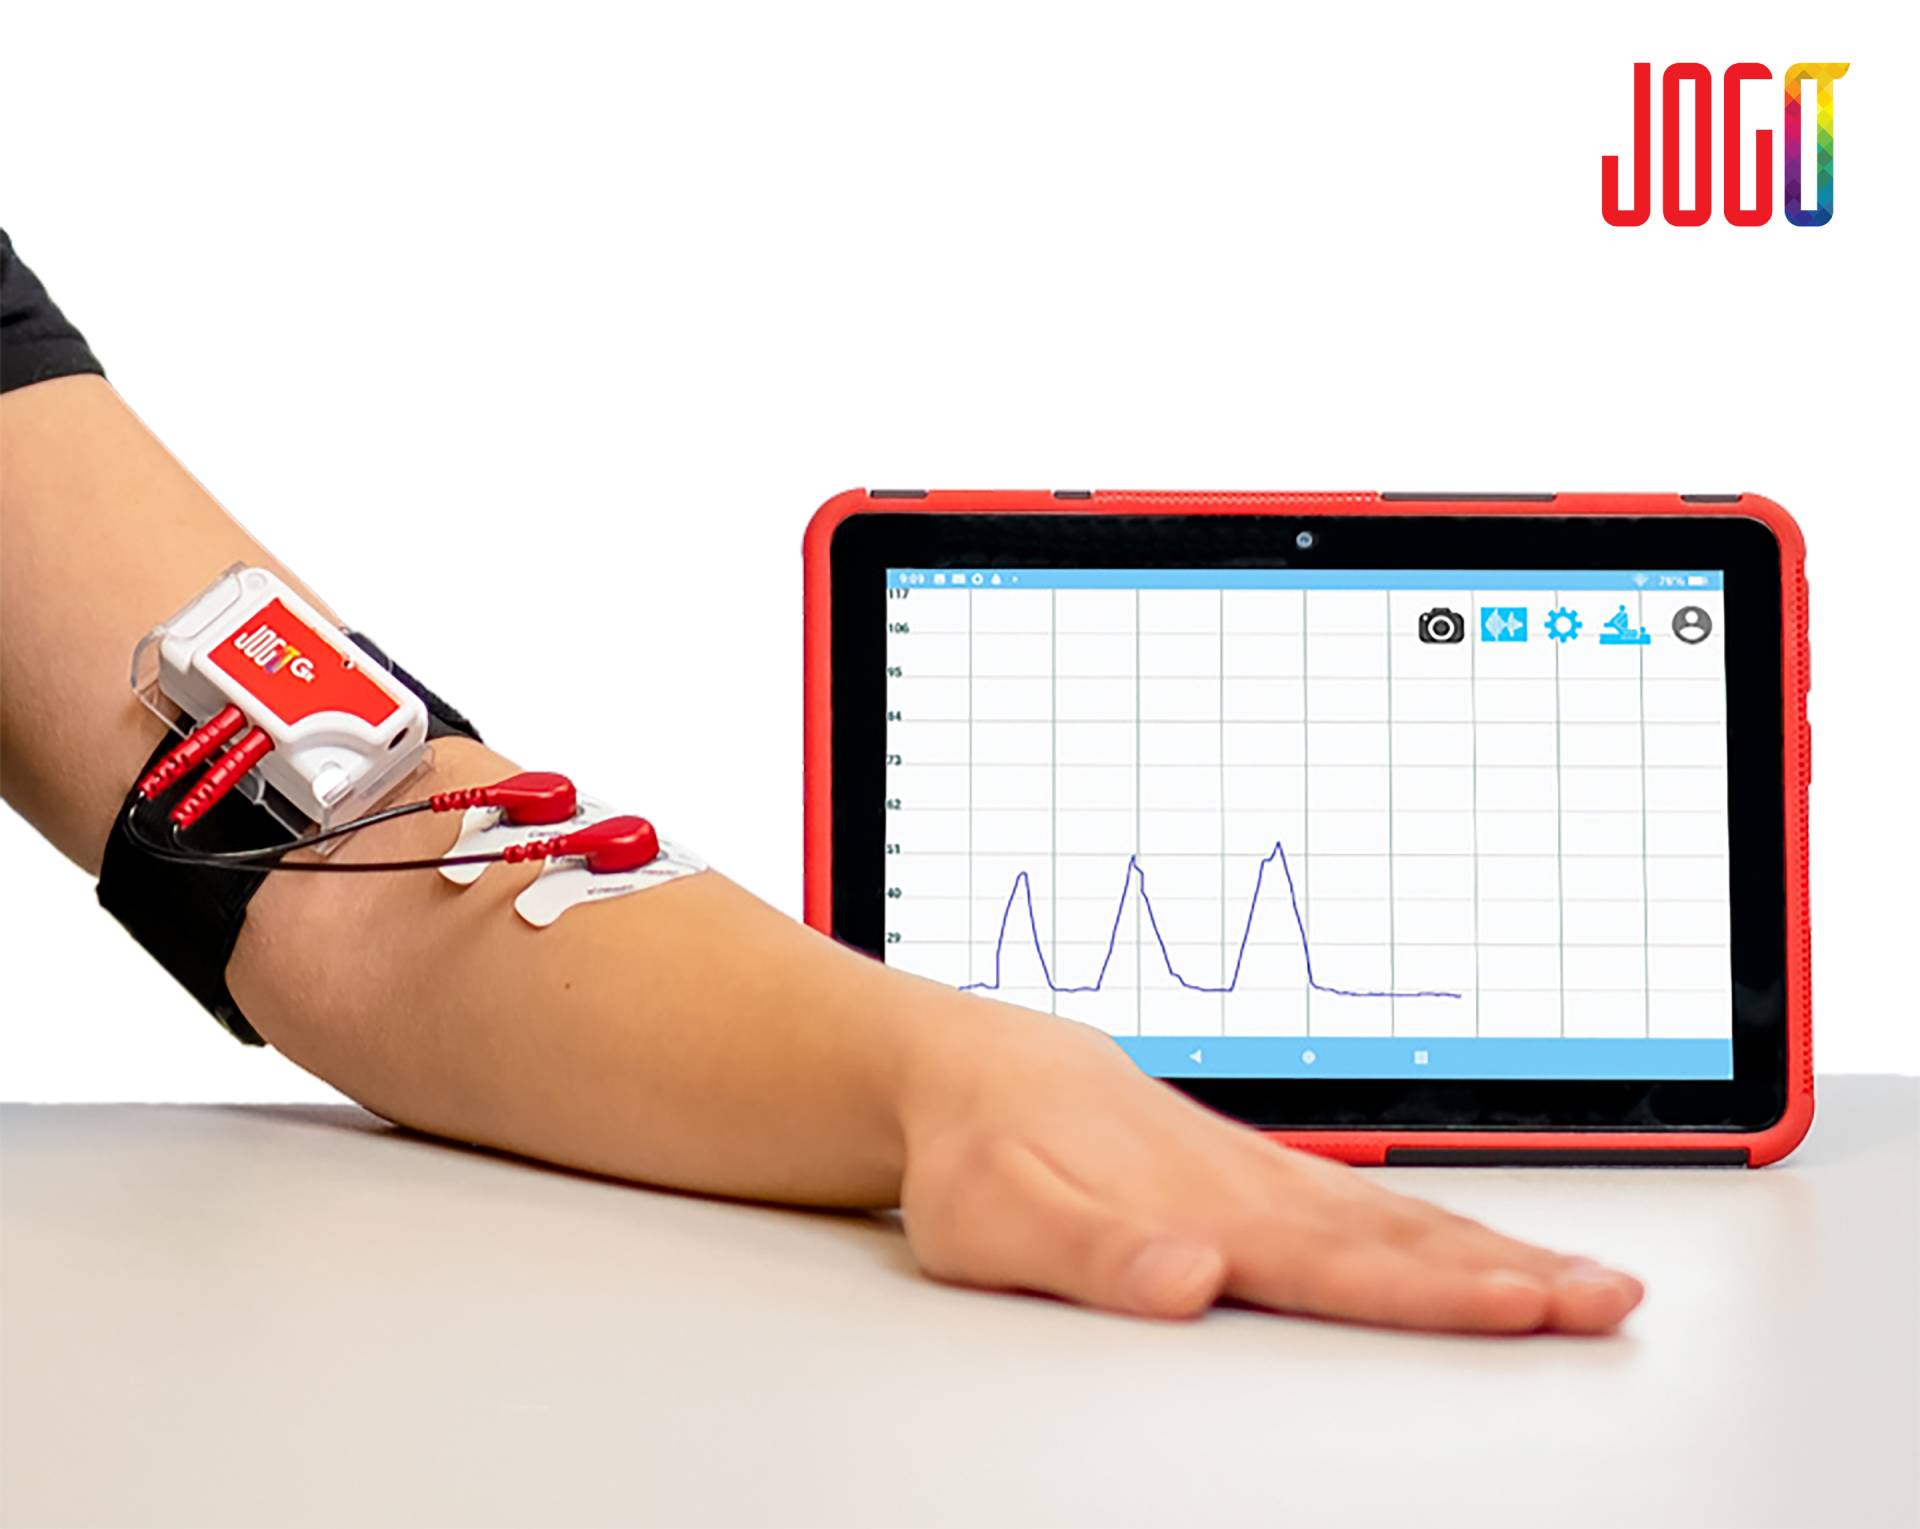 A patient using a JOGO health monitoring device with a monitor.